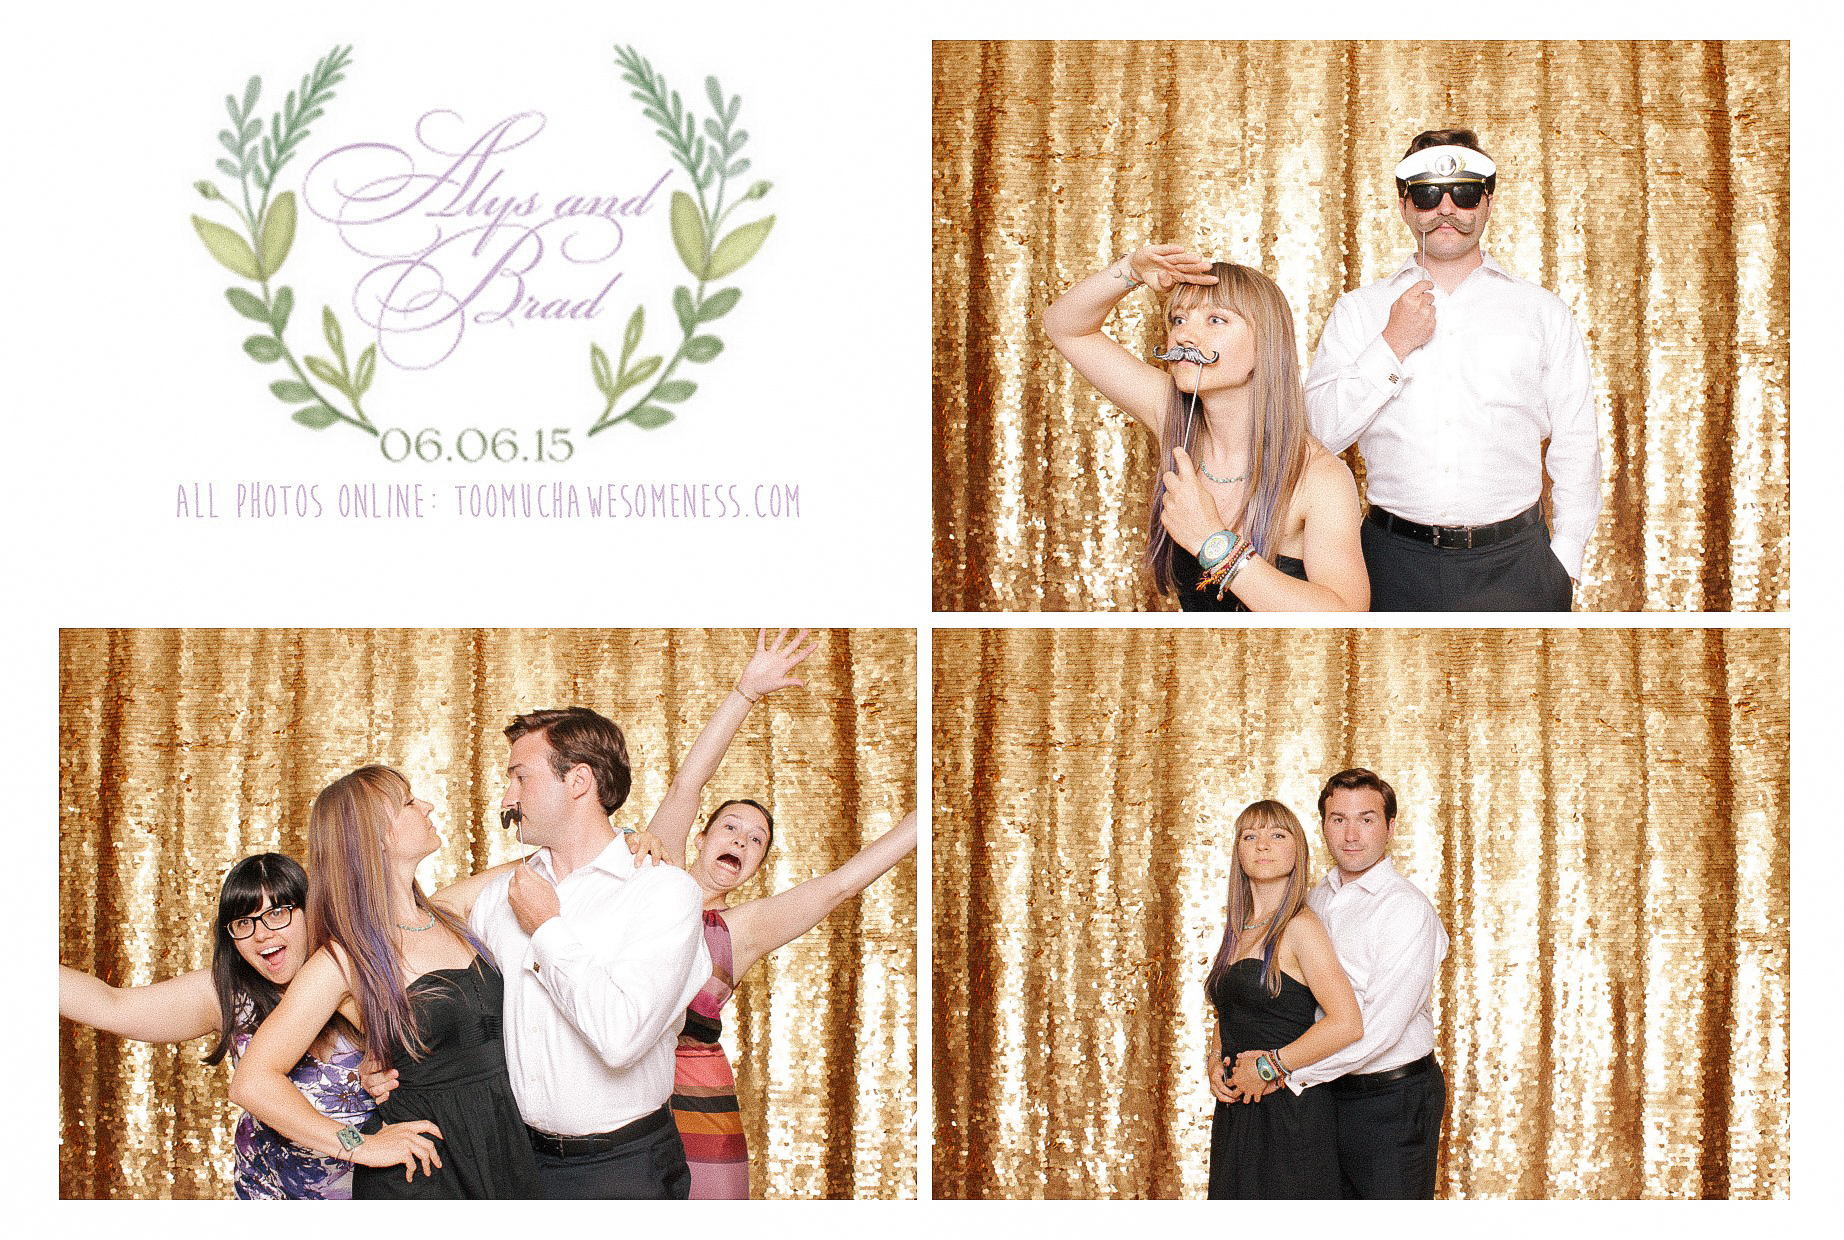 00241-Photo Booth at the Cleveland Botanical Garden Alys and Brad-20150606.jpg